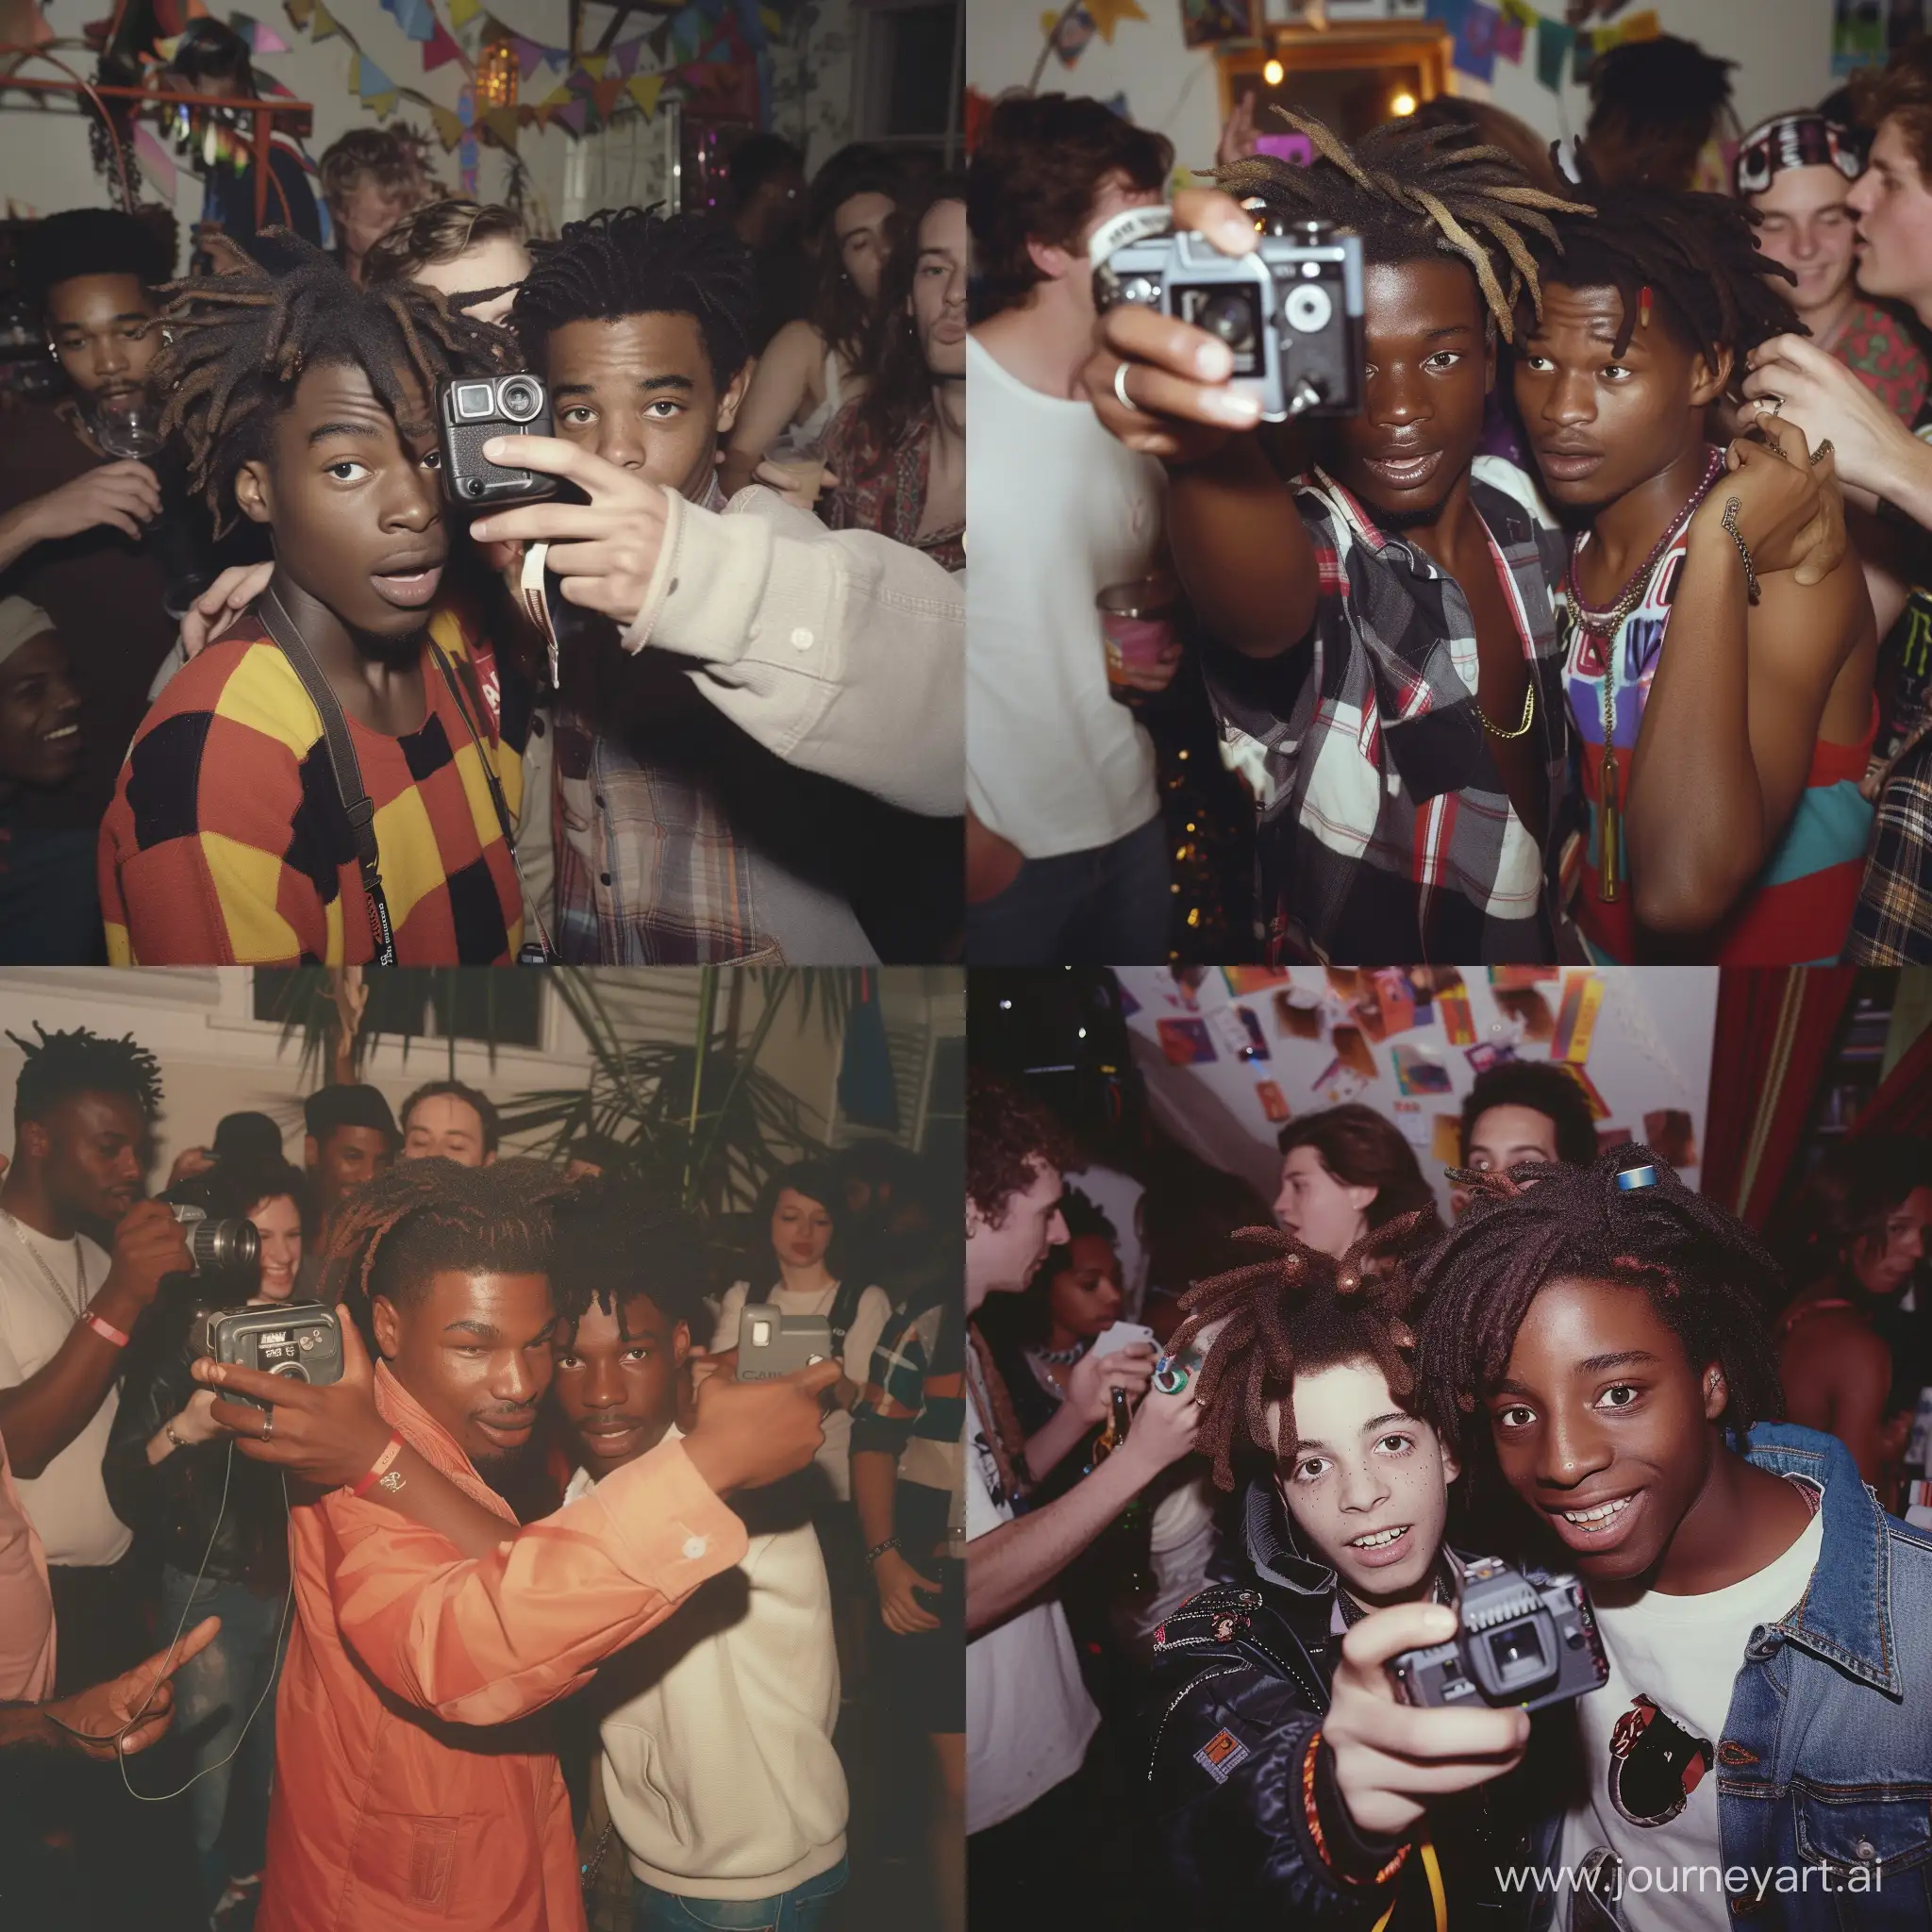 A black boy with dread (in the 90s) taking selfie with his white boyfriend with a small camera, during a house party, with other people having fun.